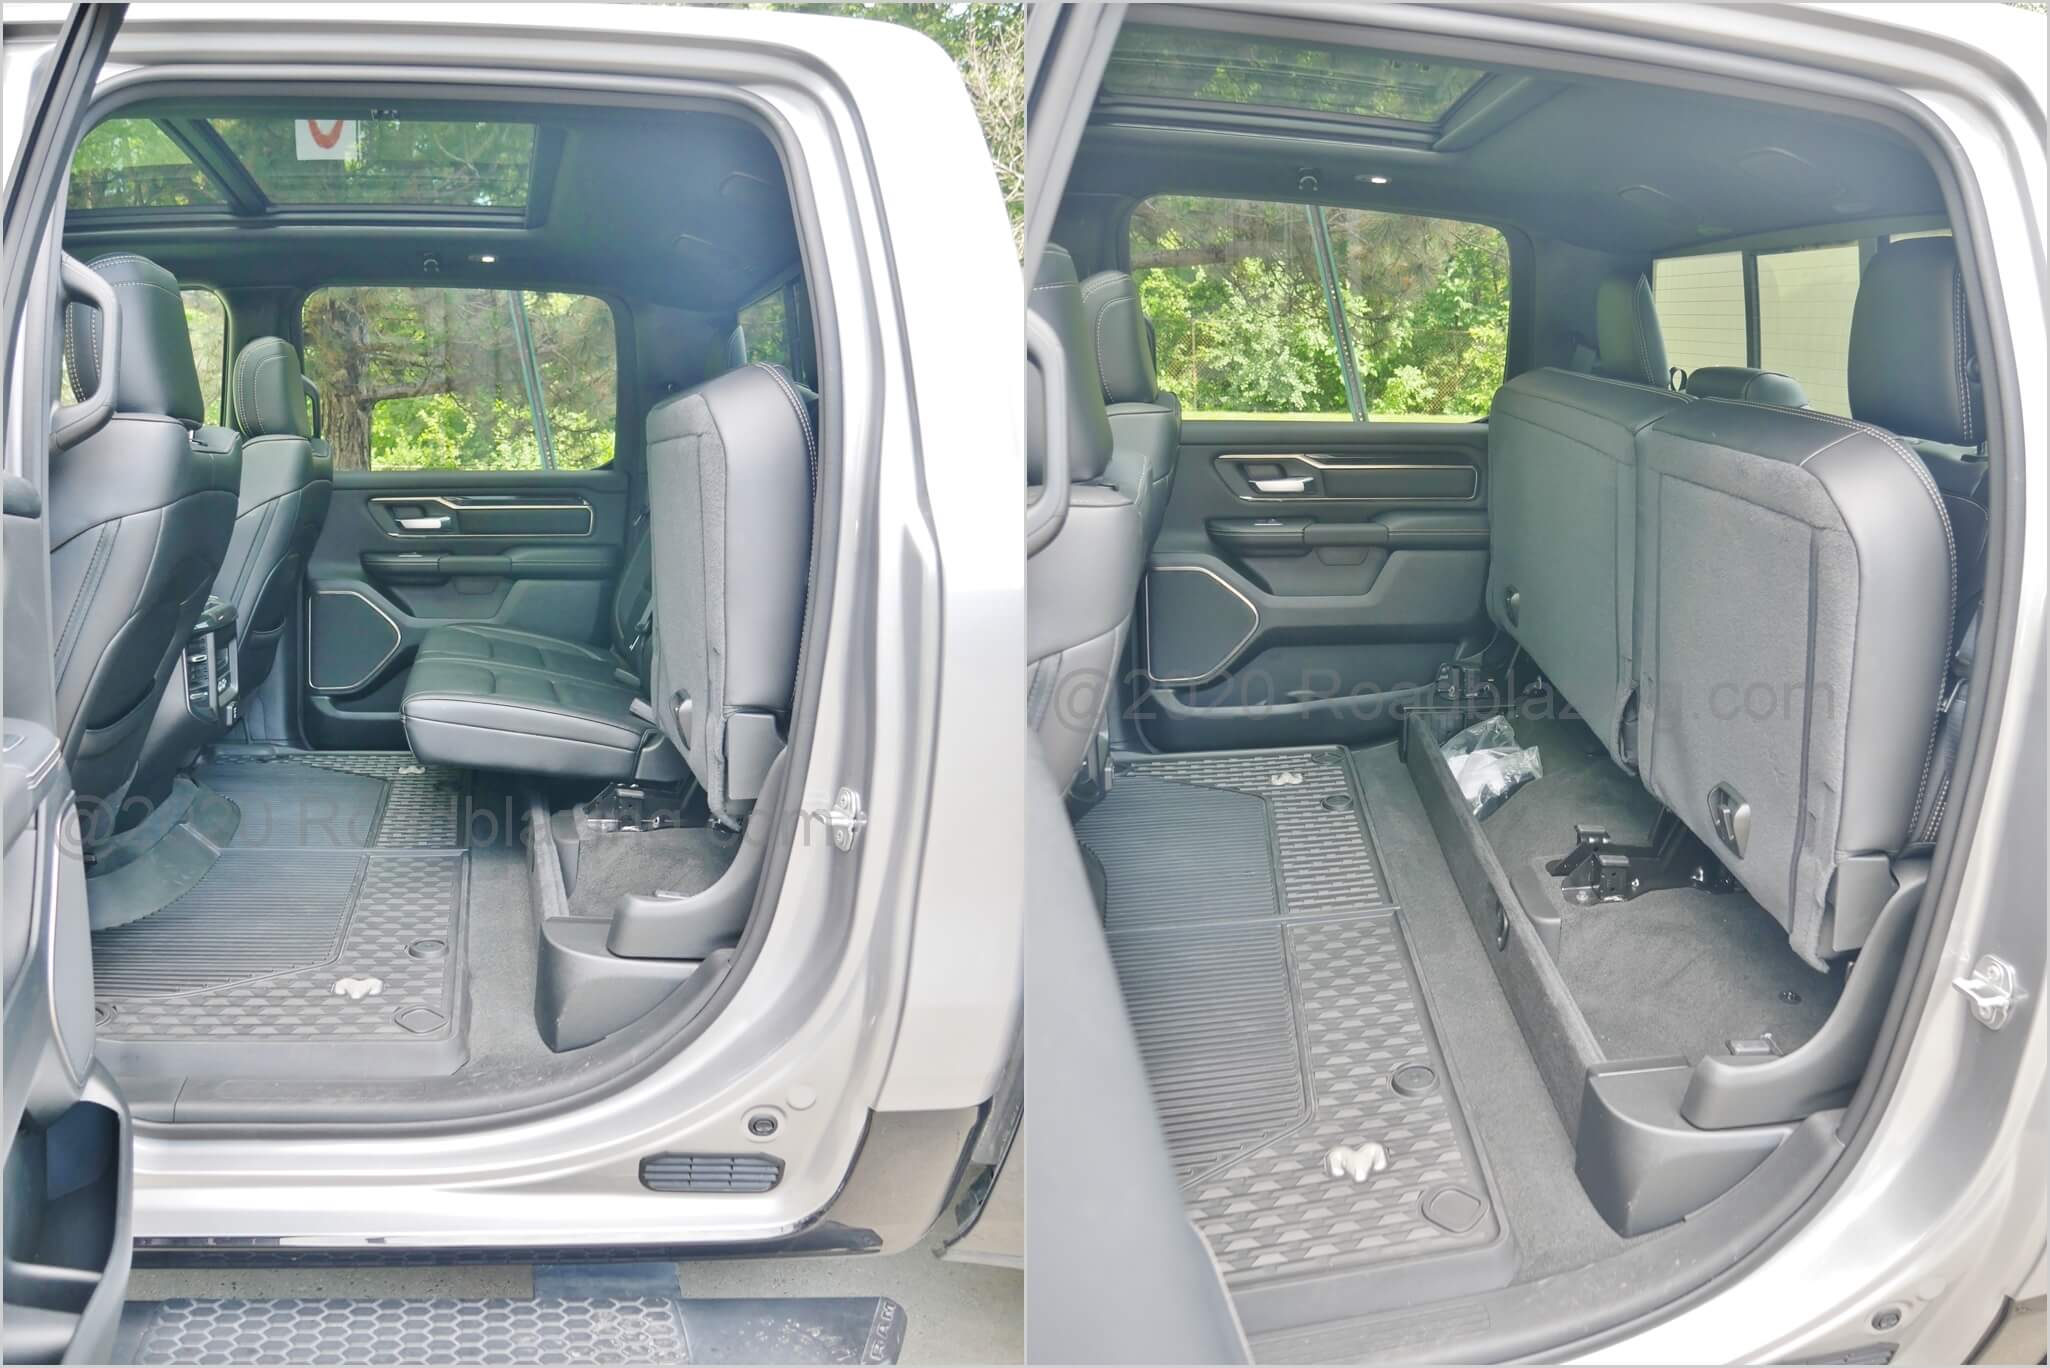 2020 RAM 1500 Rebel Crew 4x4 TDi: Row 2 w/ 60:40% split fold up seat cushions for expanded cabin cargo space